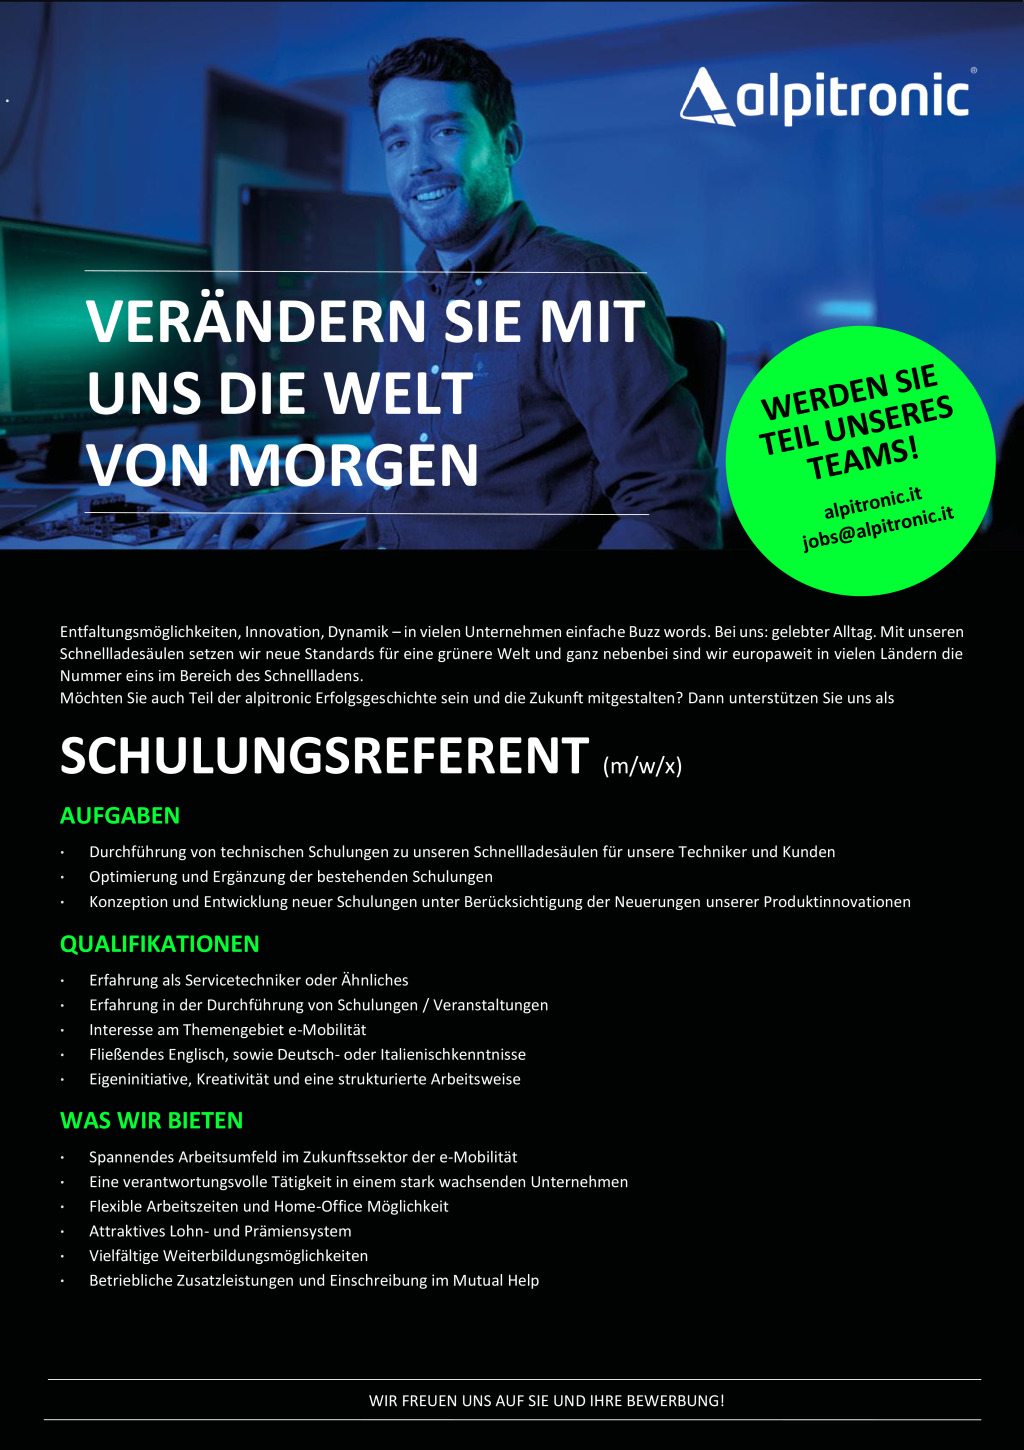 Schulungsreferent (m/w/x)